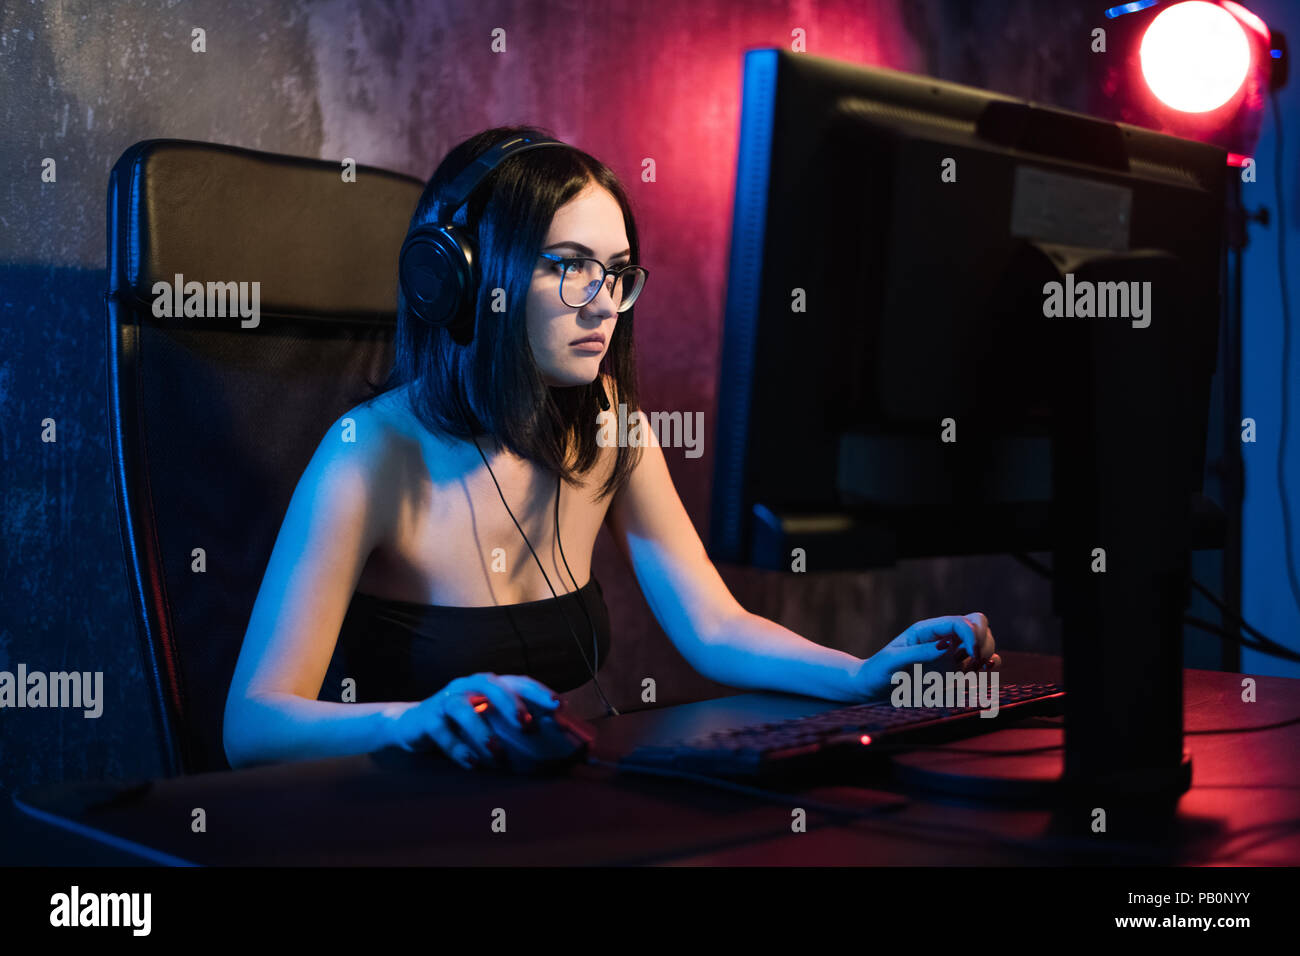 Online Gaming. Gaming Modern Leisure. Cyber Sport Arena. Tech Shop. Play  Computer Games Stock Photo - Image of casino, player: 207371568